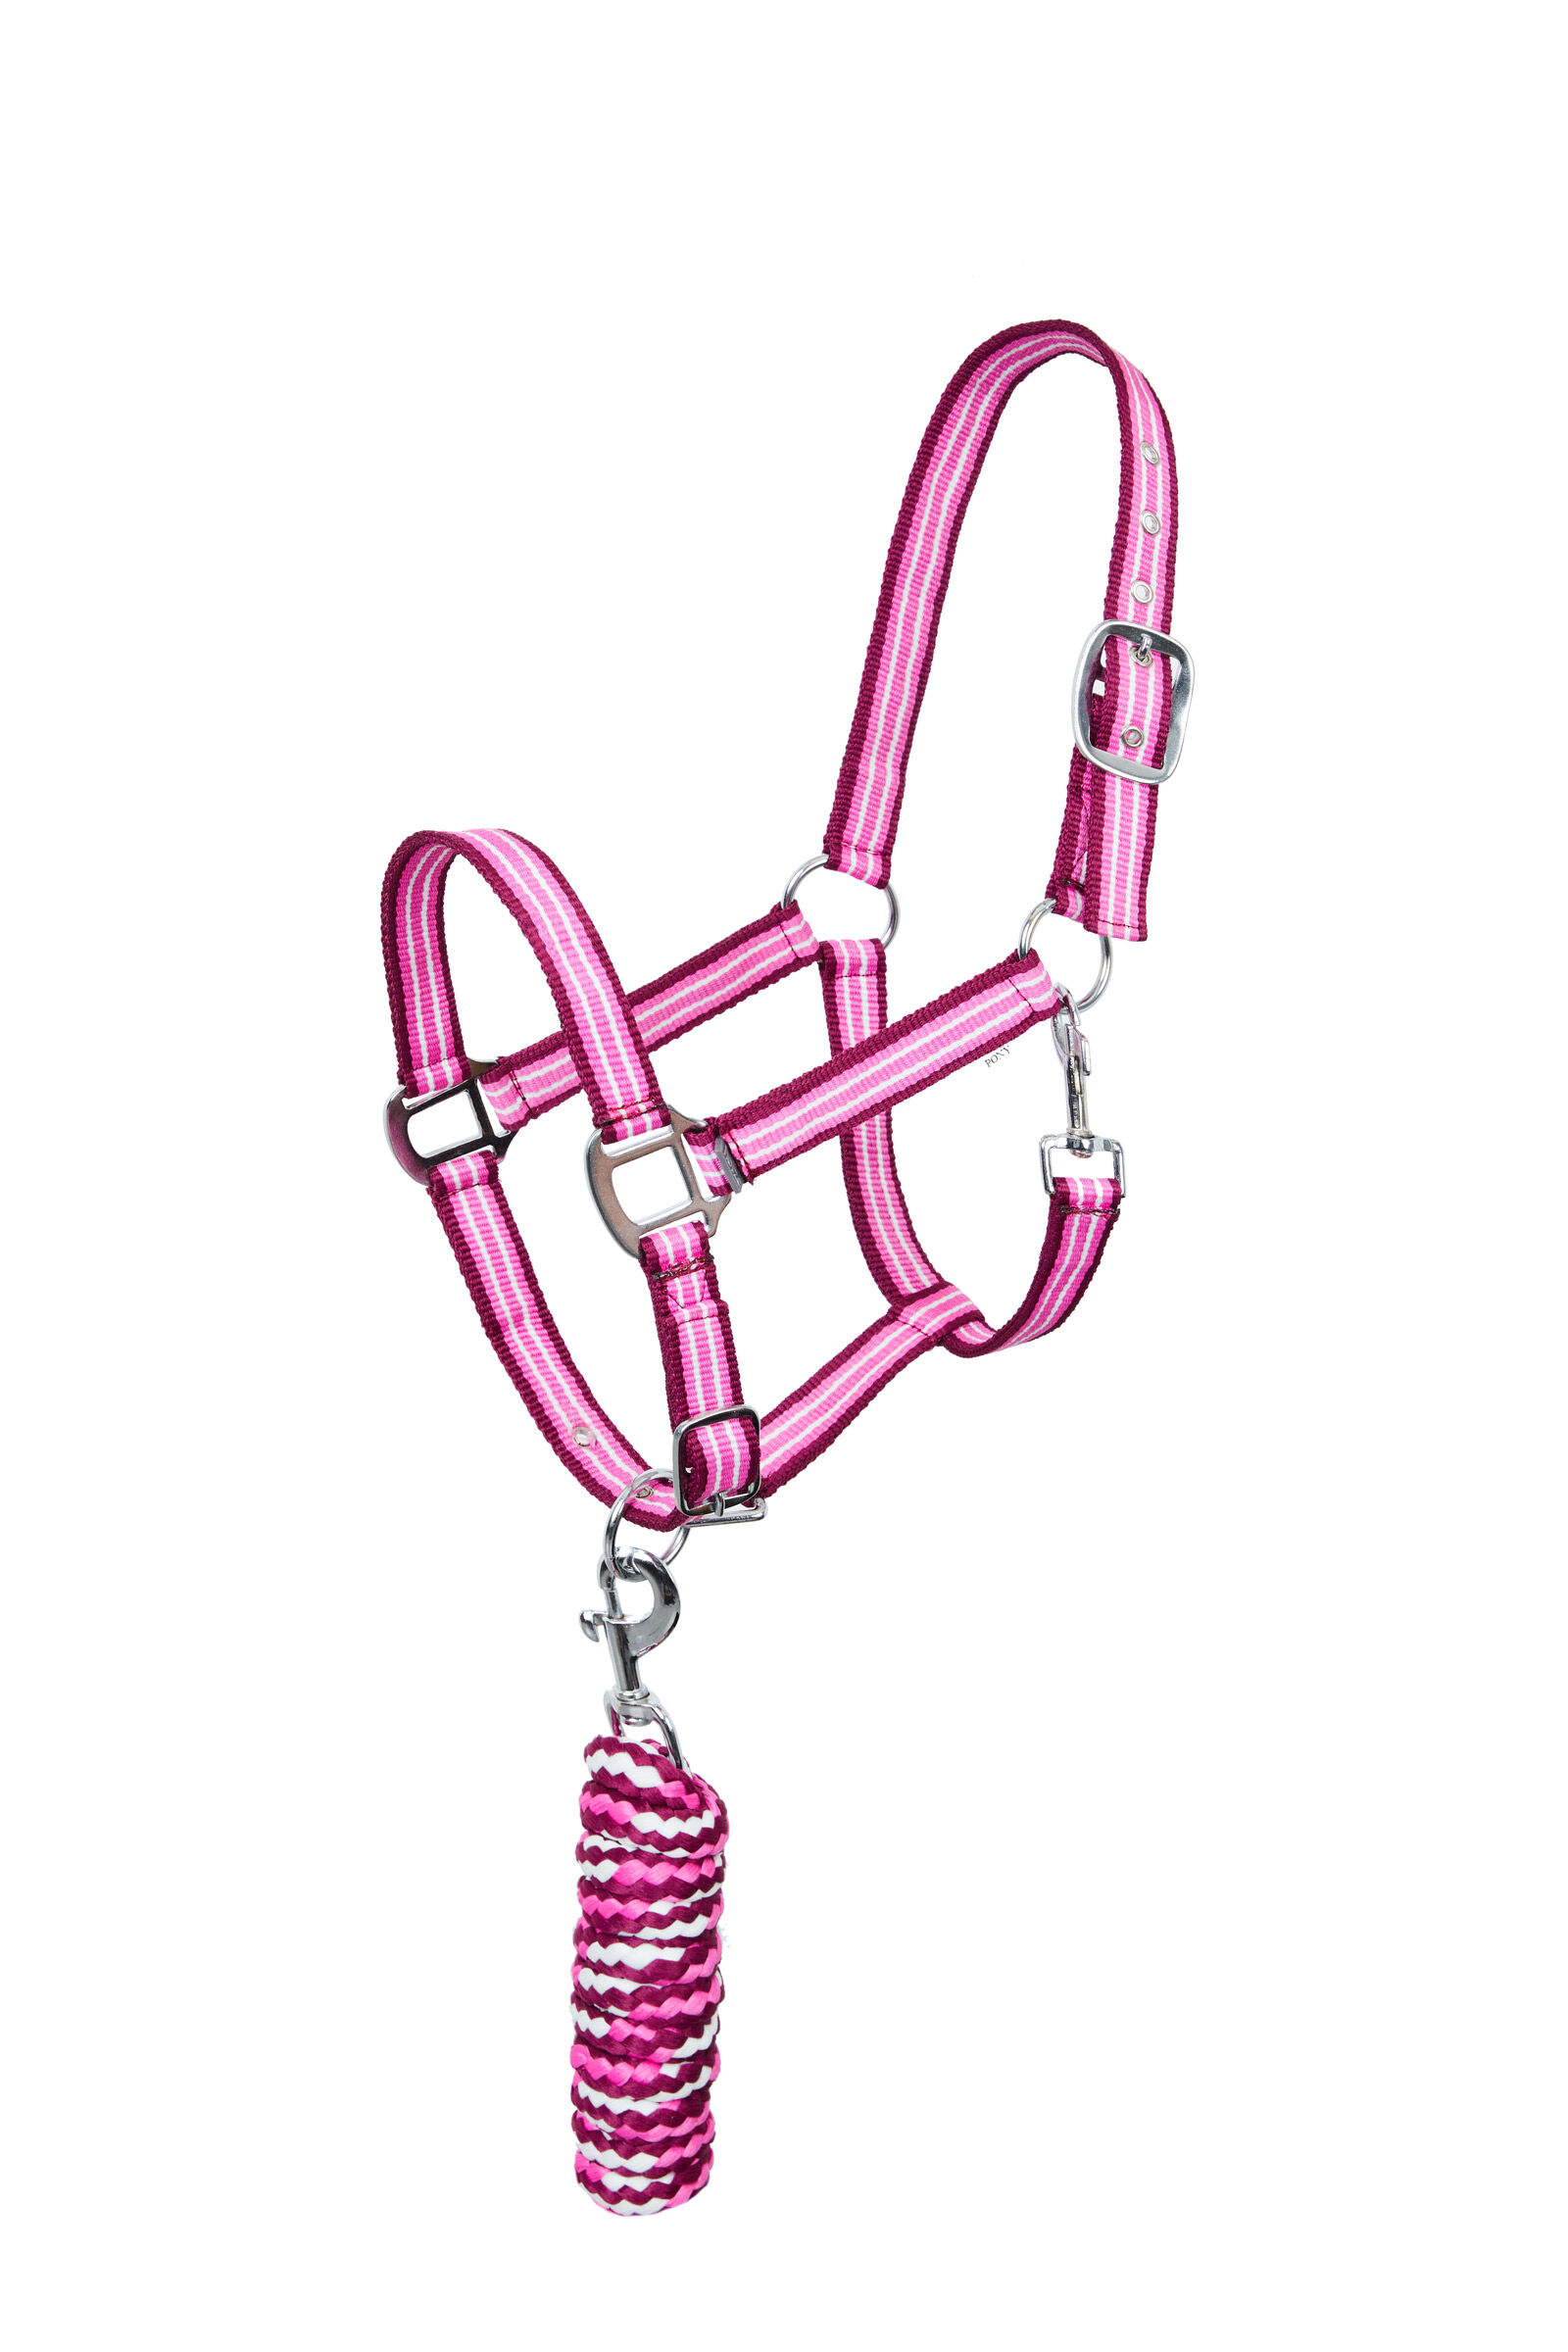 Horze Arturo Headcollar and Lead Rope set All Sizes in stock horse pony 